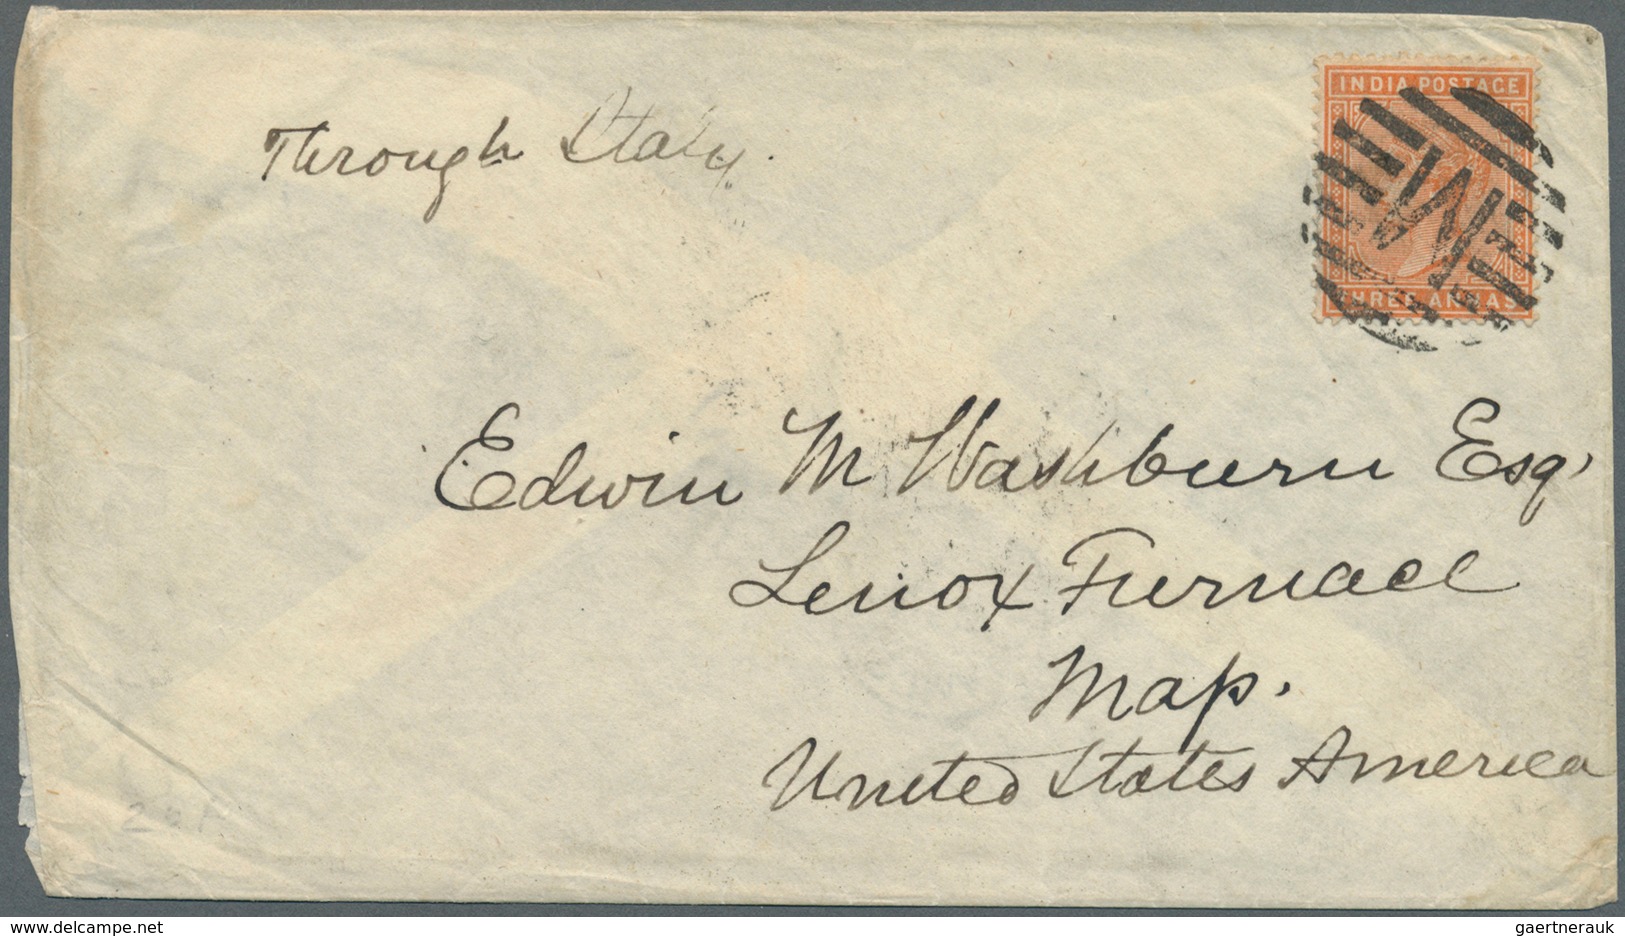 Indien: 1887-1902: Four Covers And Postal Stationery Items From India To The U.S.A. And One Cover (1 - 1852 Sind Province